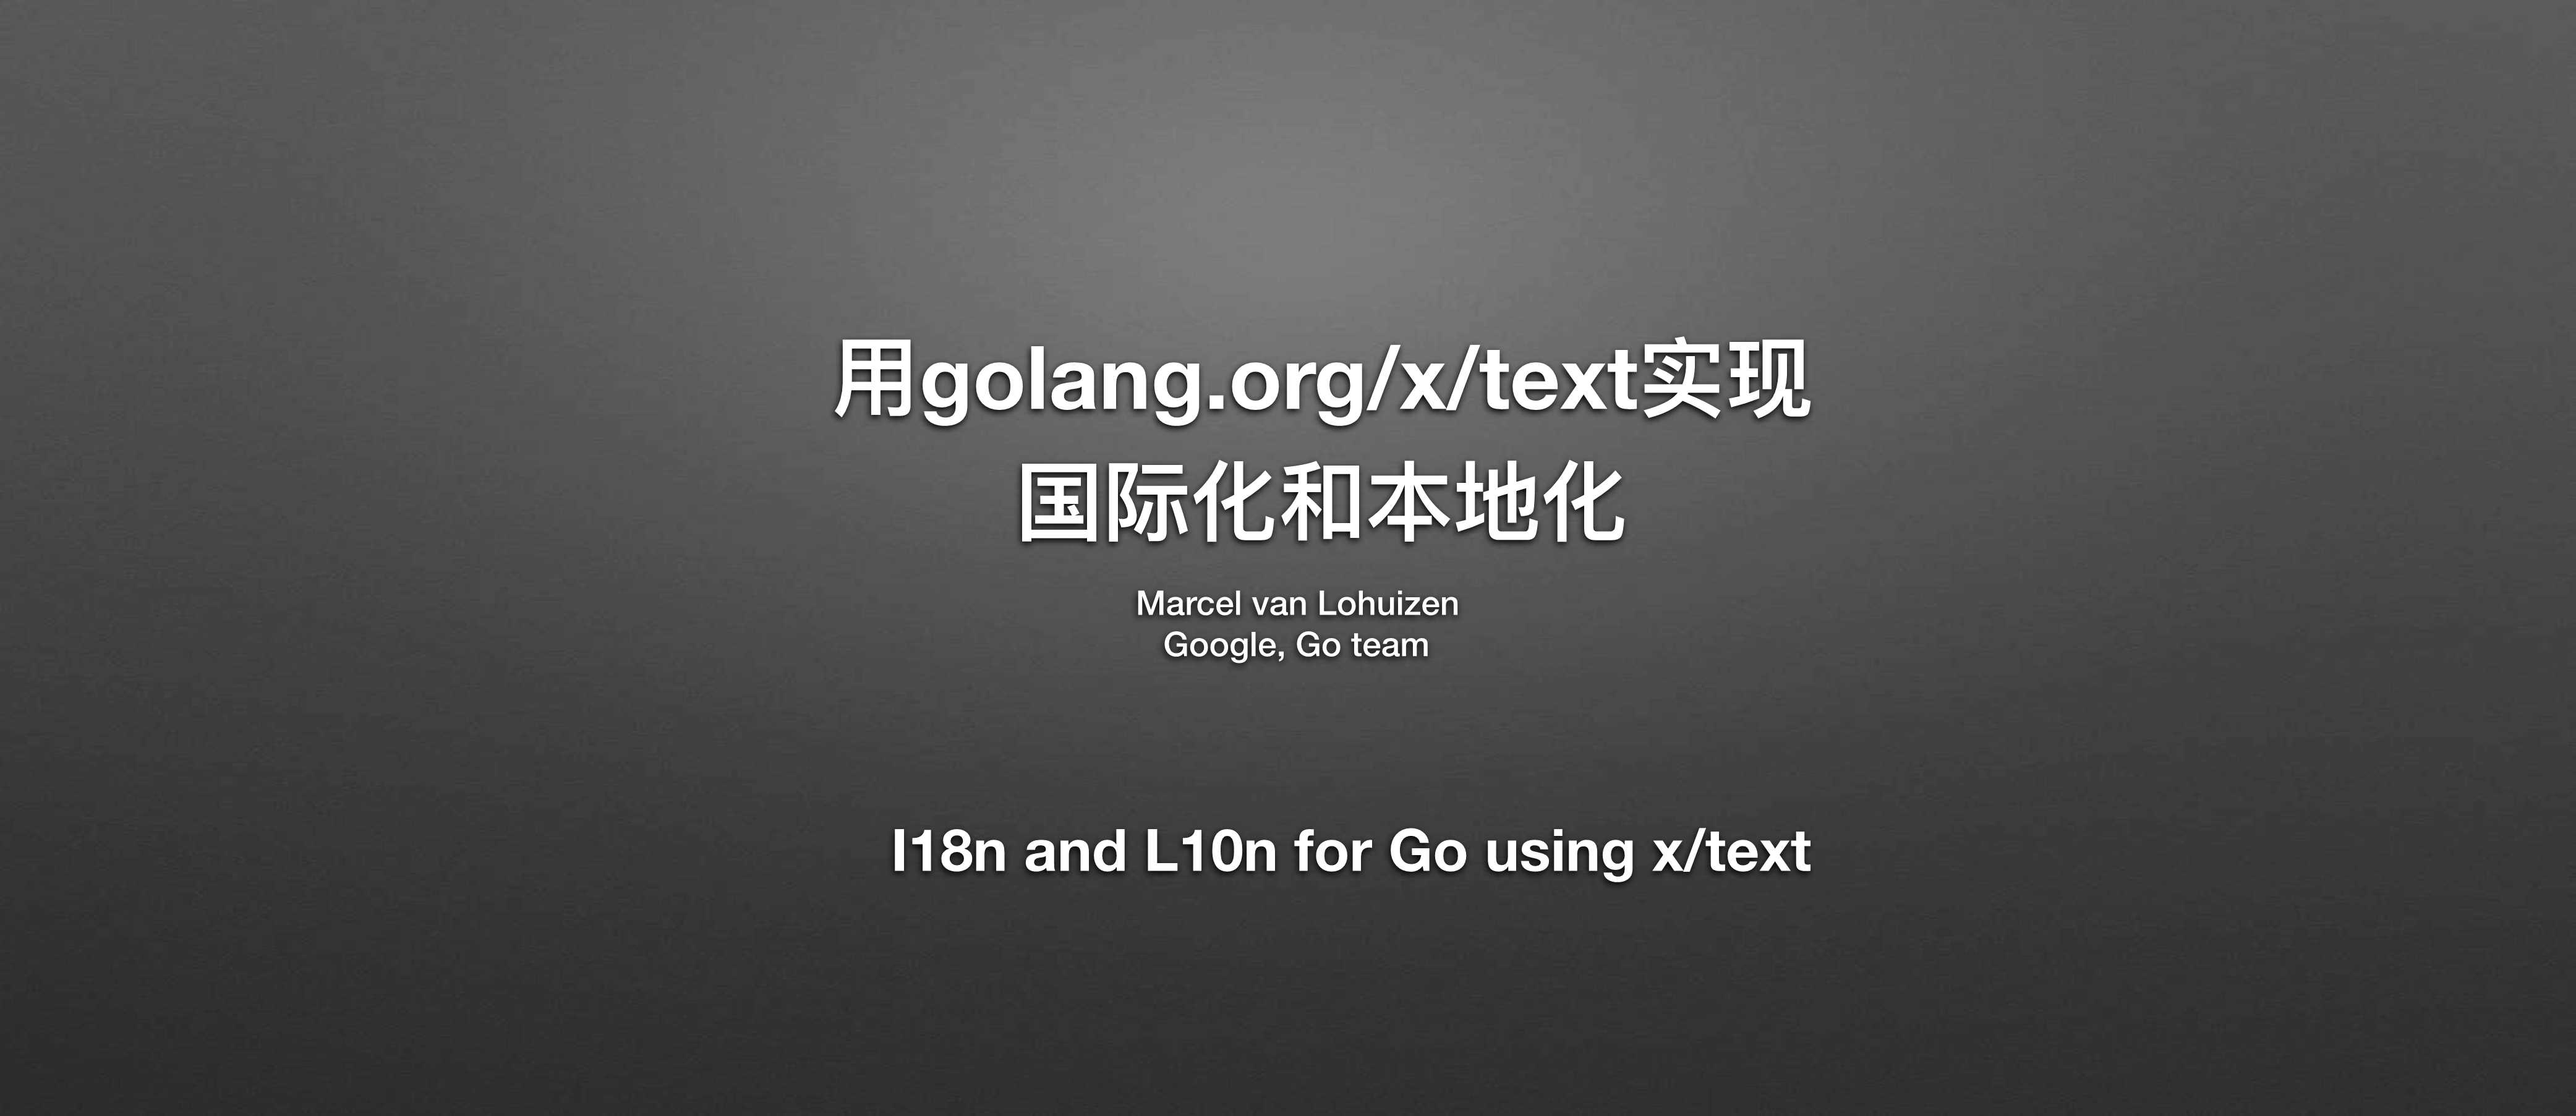 I18n and L10n for Go using x_text-2016-37页